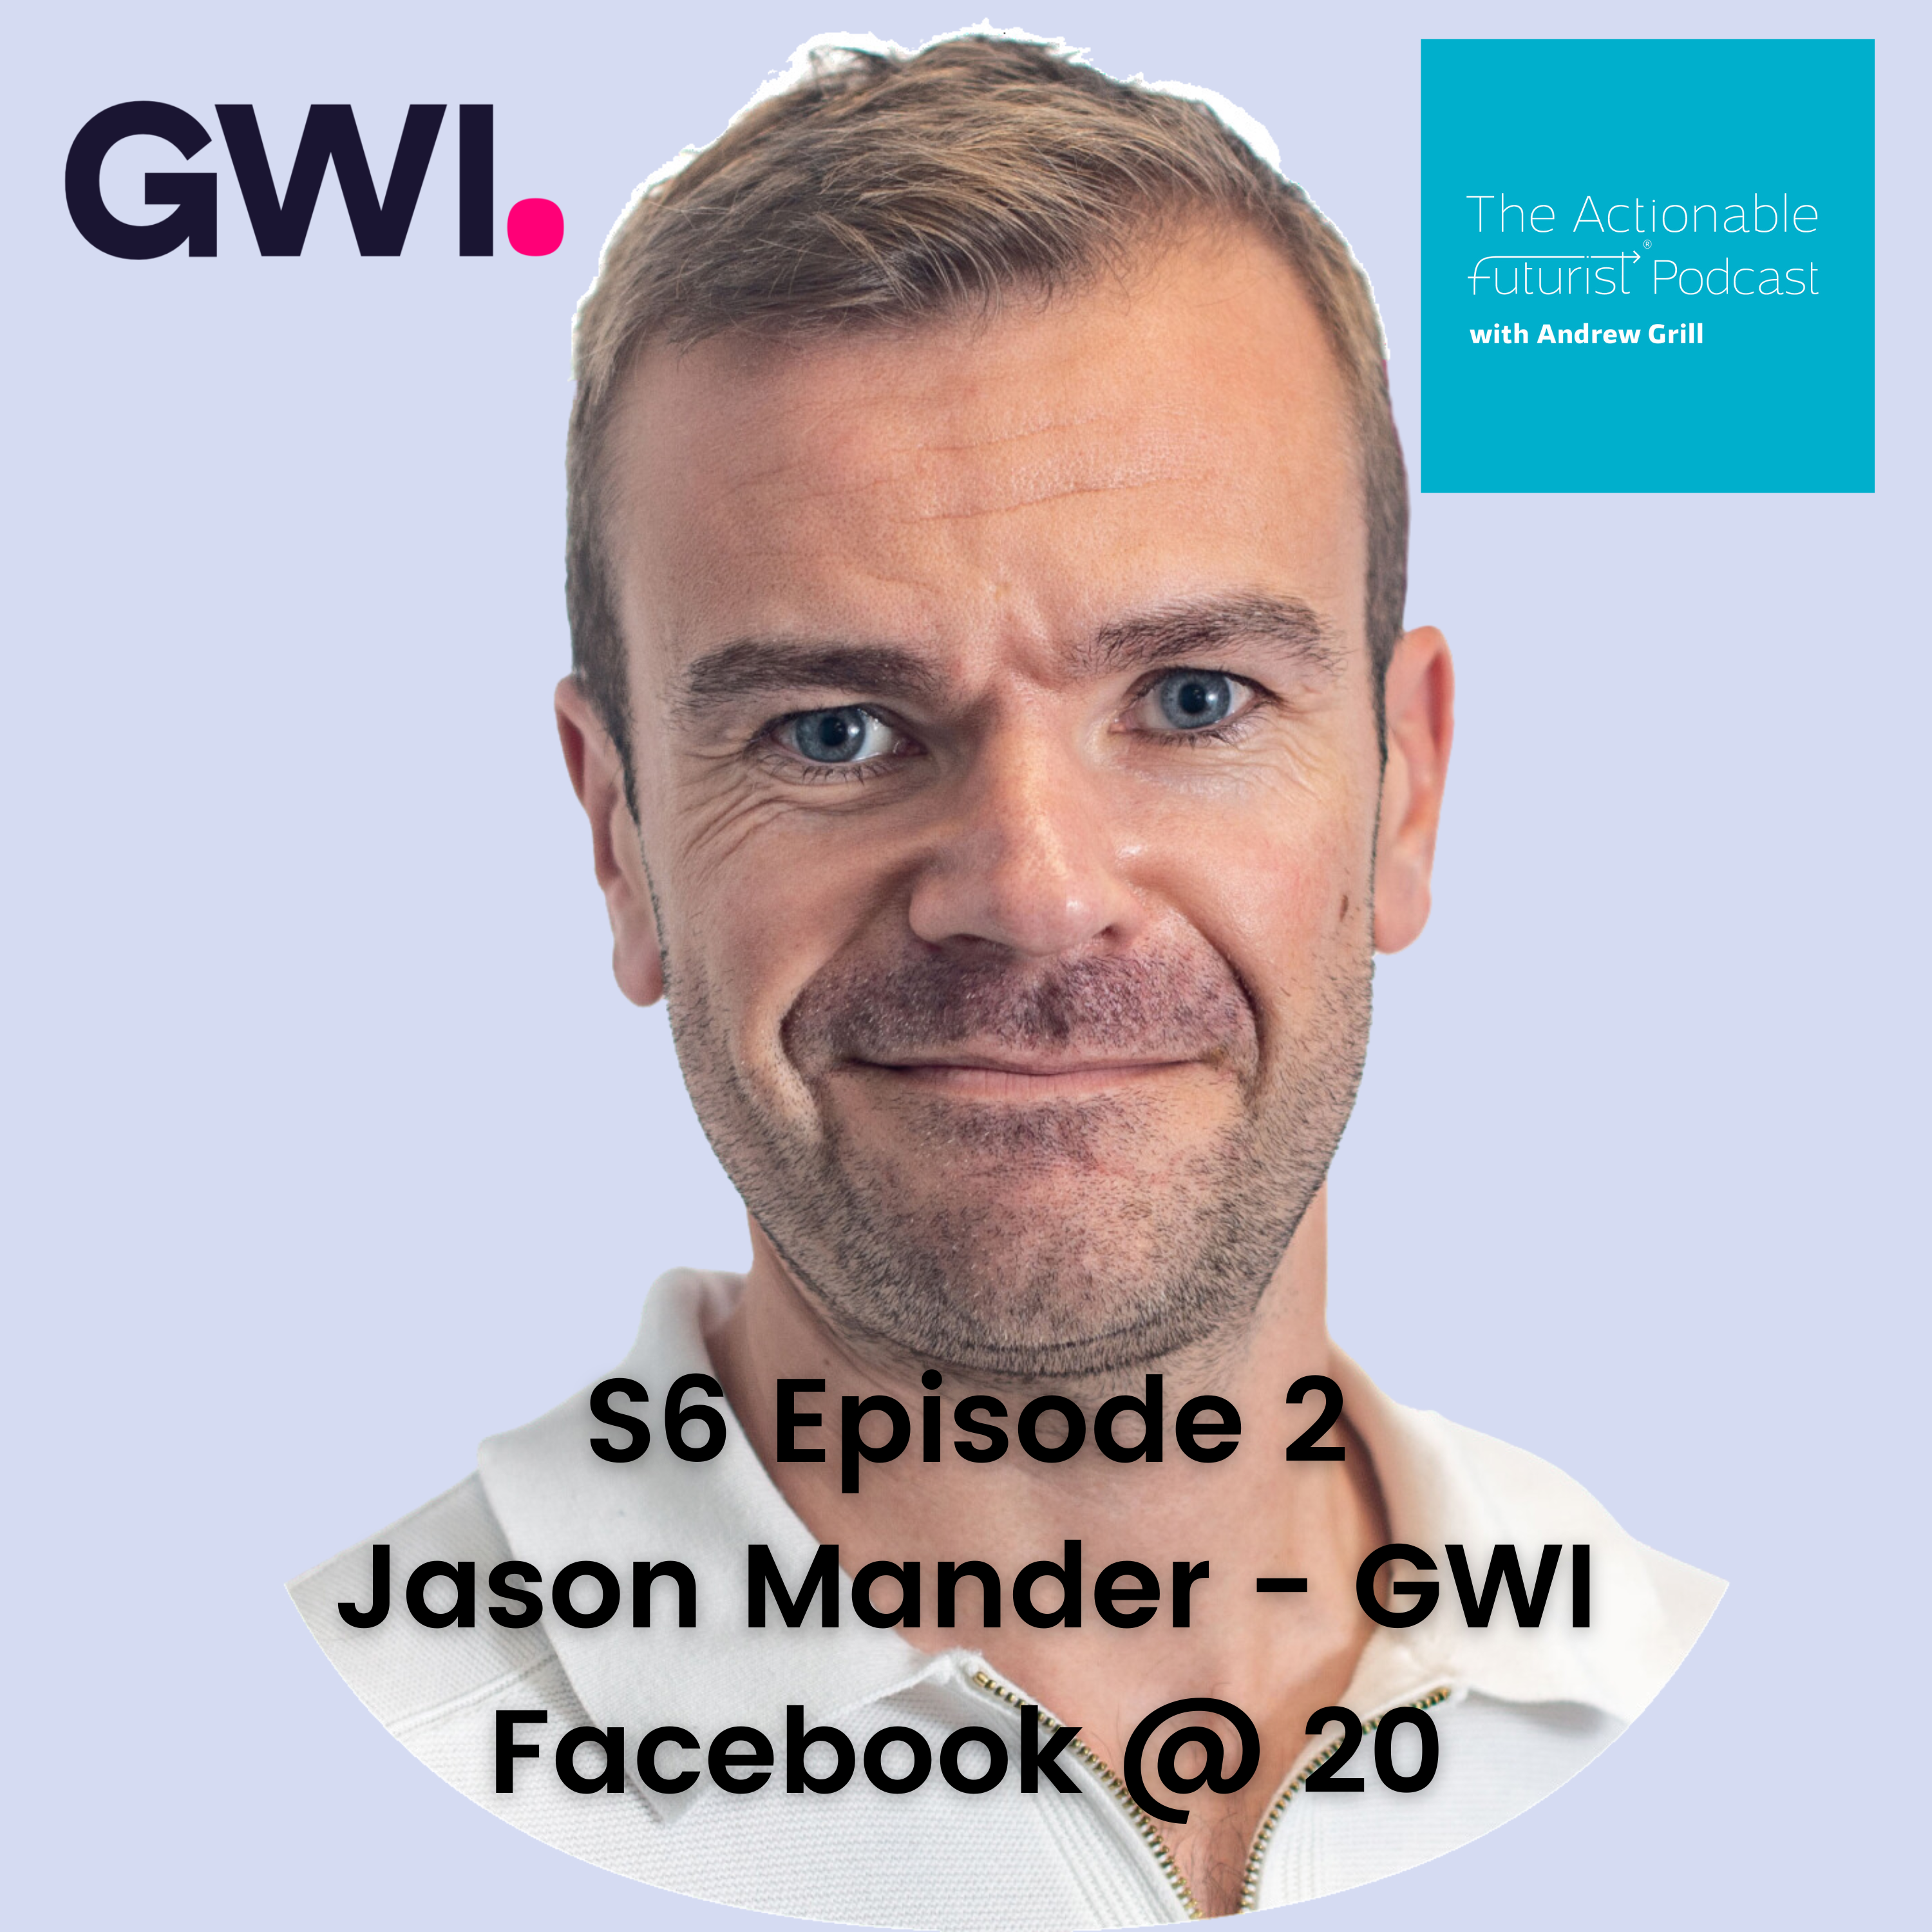 S6 Episode 2: Facebook @ 20 with Jason Mander from GWI